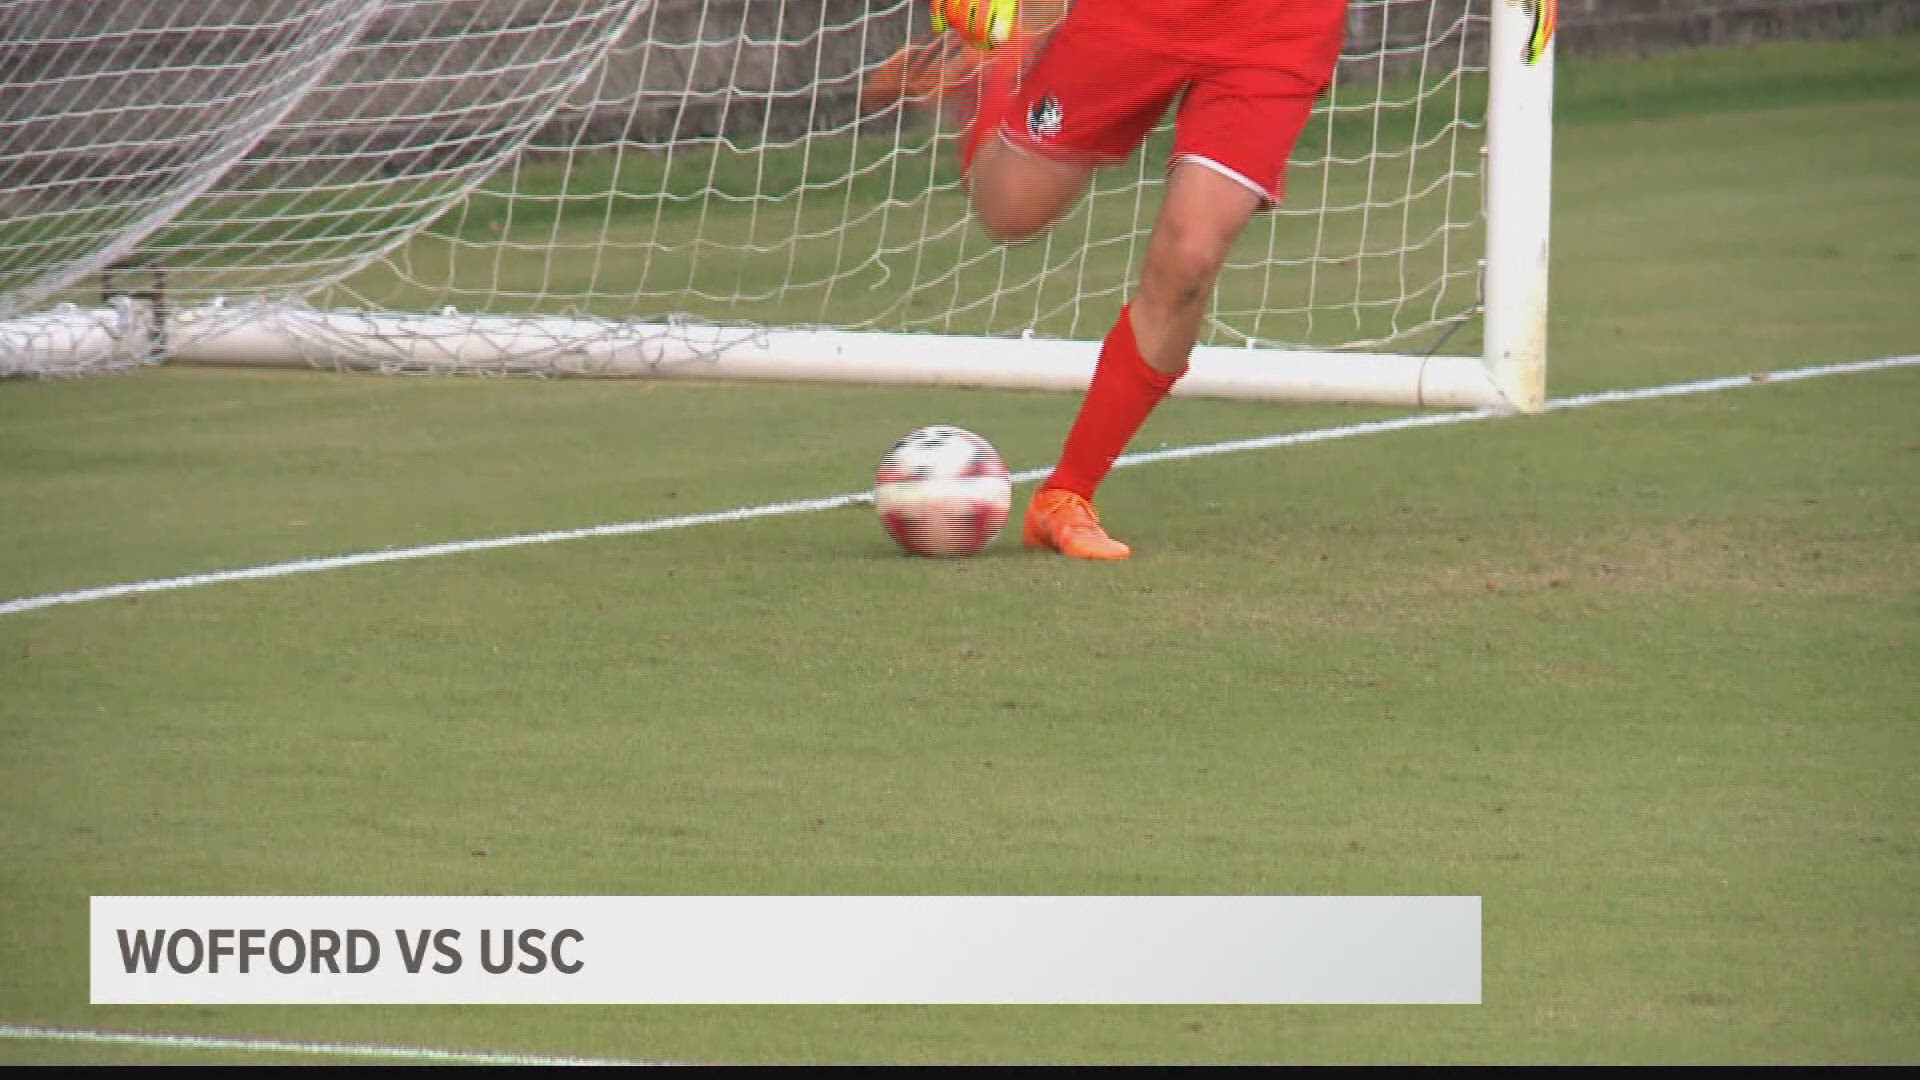 The USC men's soccer team scored four second-half goals in a four-minute flurry in a 5-0 win over Wofford.